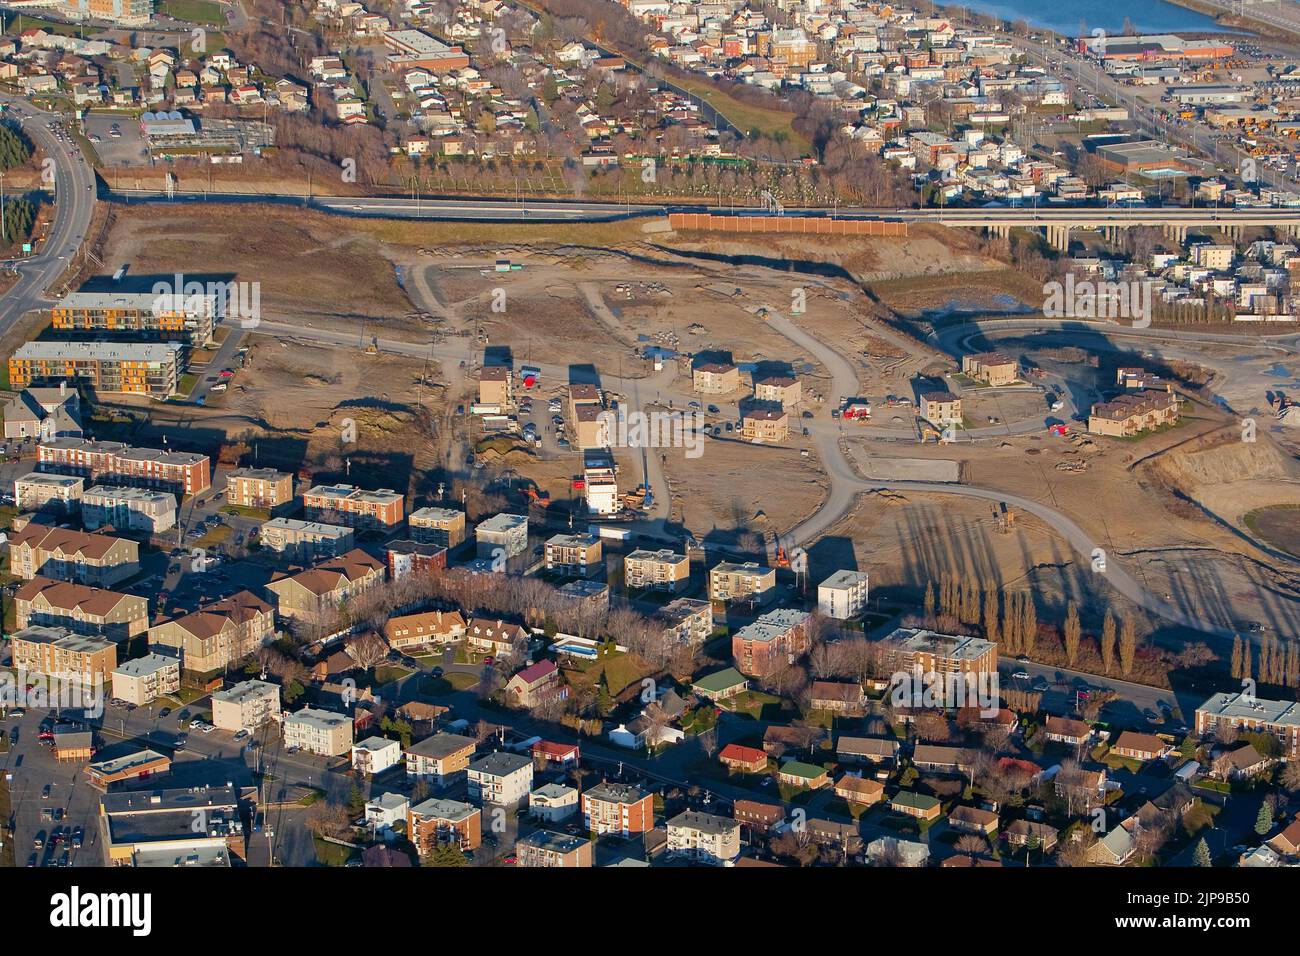 Developpement Cite Moncel development in Quebec city is pictured in this aerial photo November 11, 2009. Stock Photo